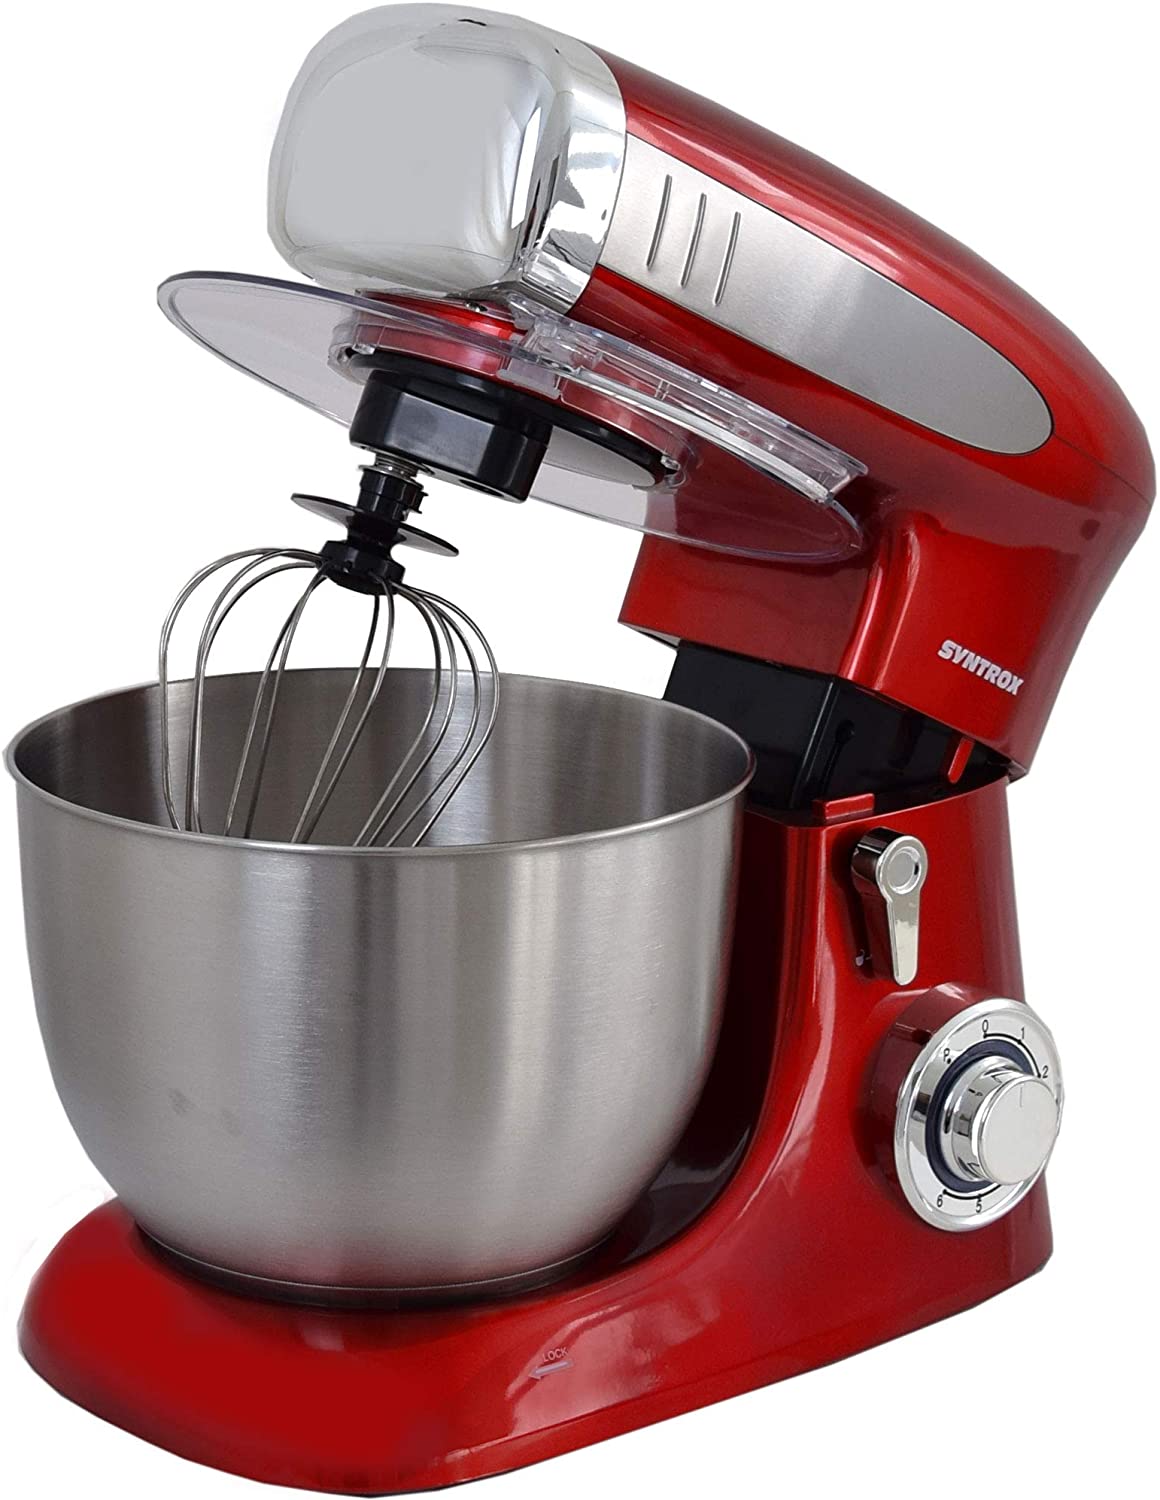 http://honestforwarder.com/uploads/product/syntrox-germany-km-1300w-red-food-processor-kneading-machine-mixer-stainless-steel-container-6-5-litres-red-trBflfOVNZ0.jpg